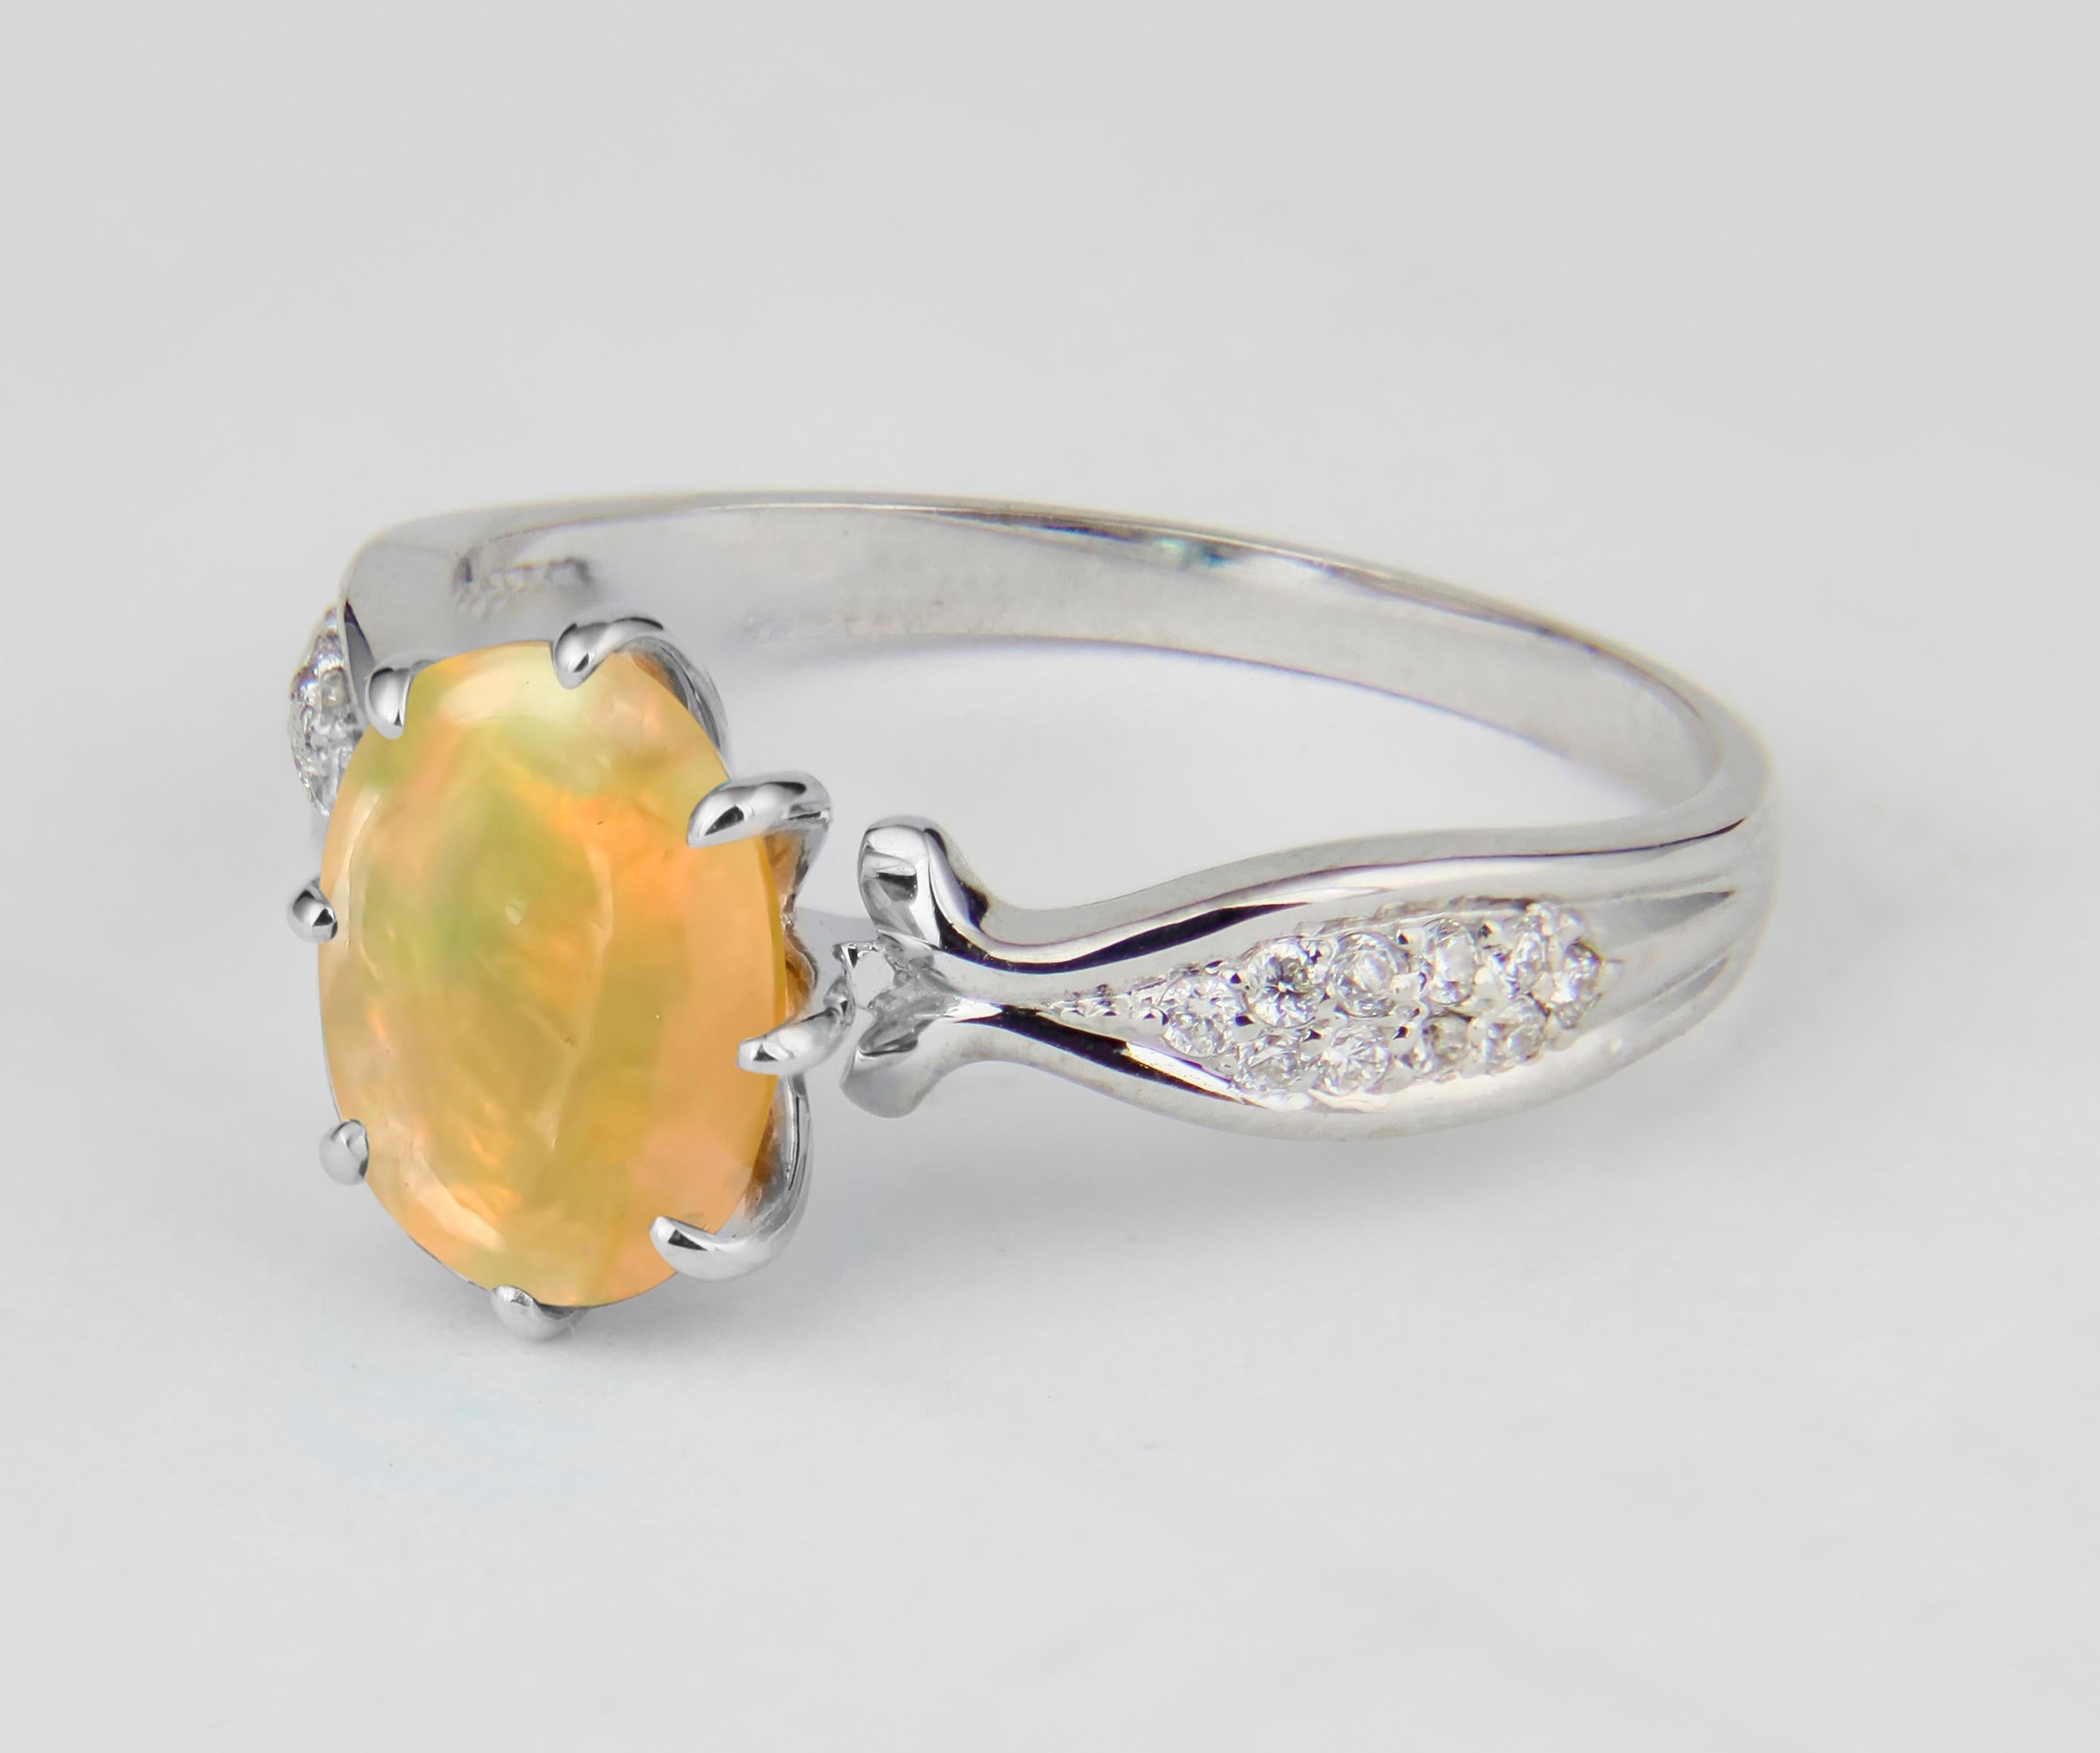 For Sale:  Opal 14k Gold Ring, Cabochon Opal Ring, Opal Gold Ring 4